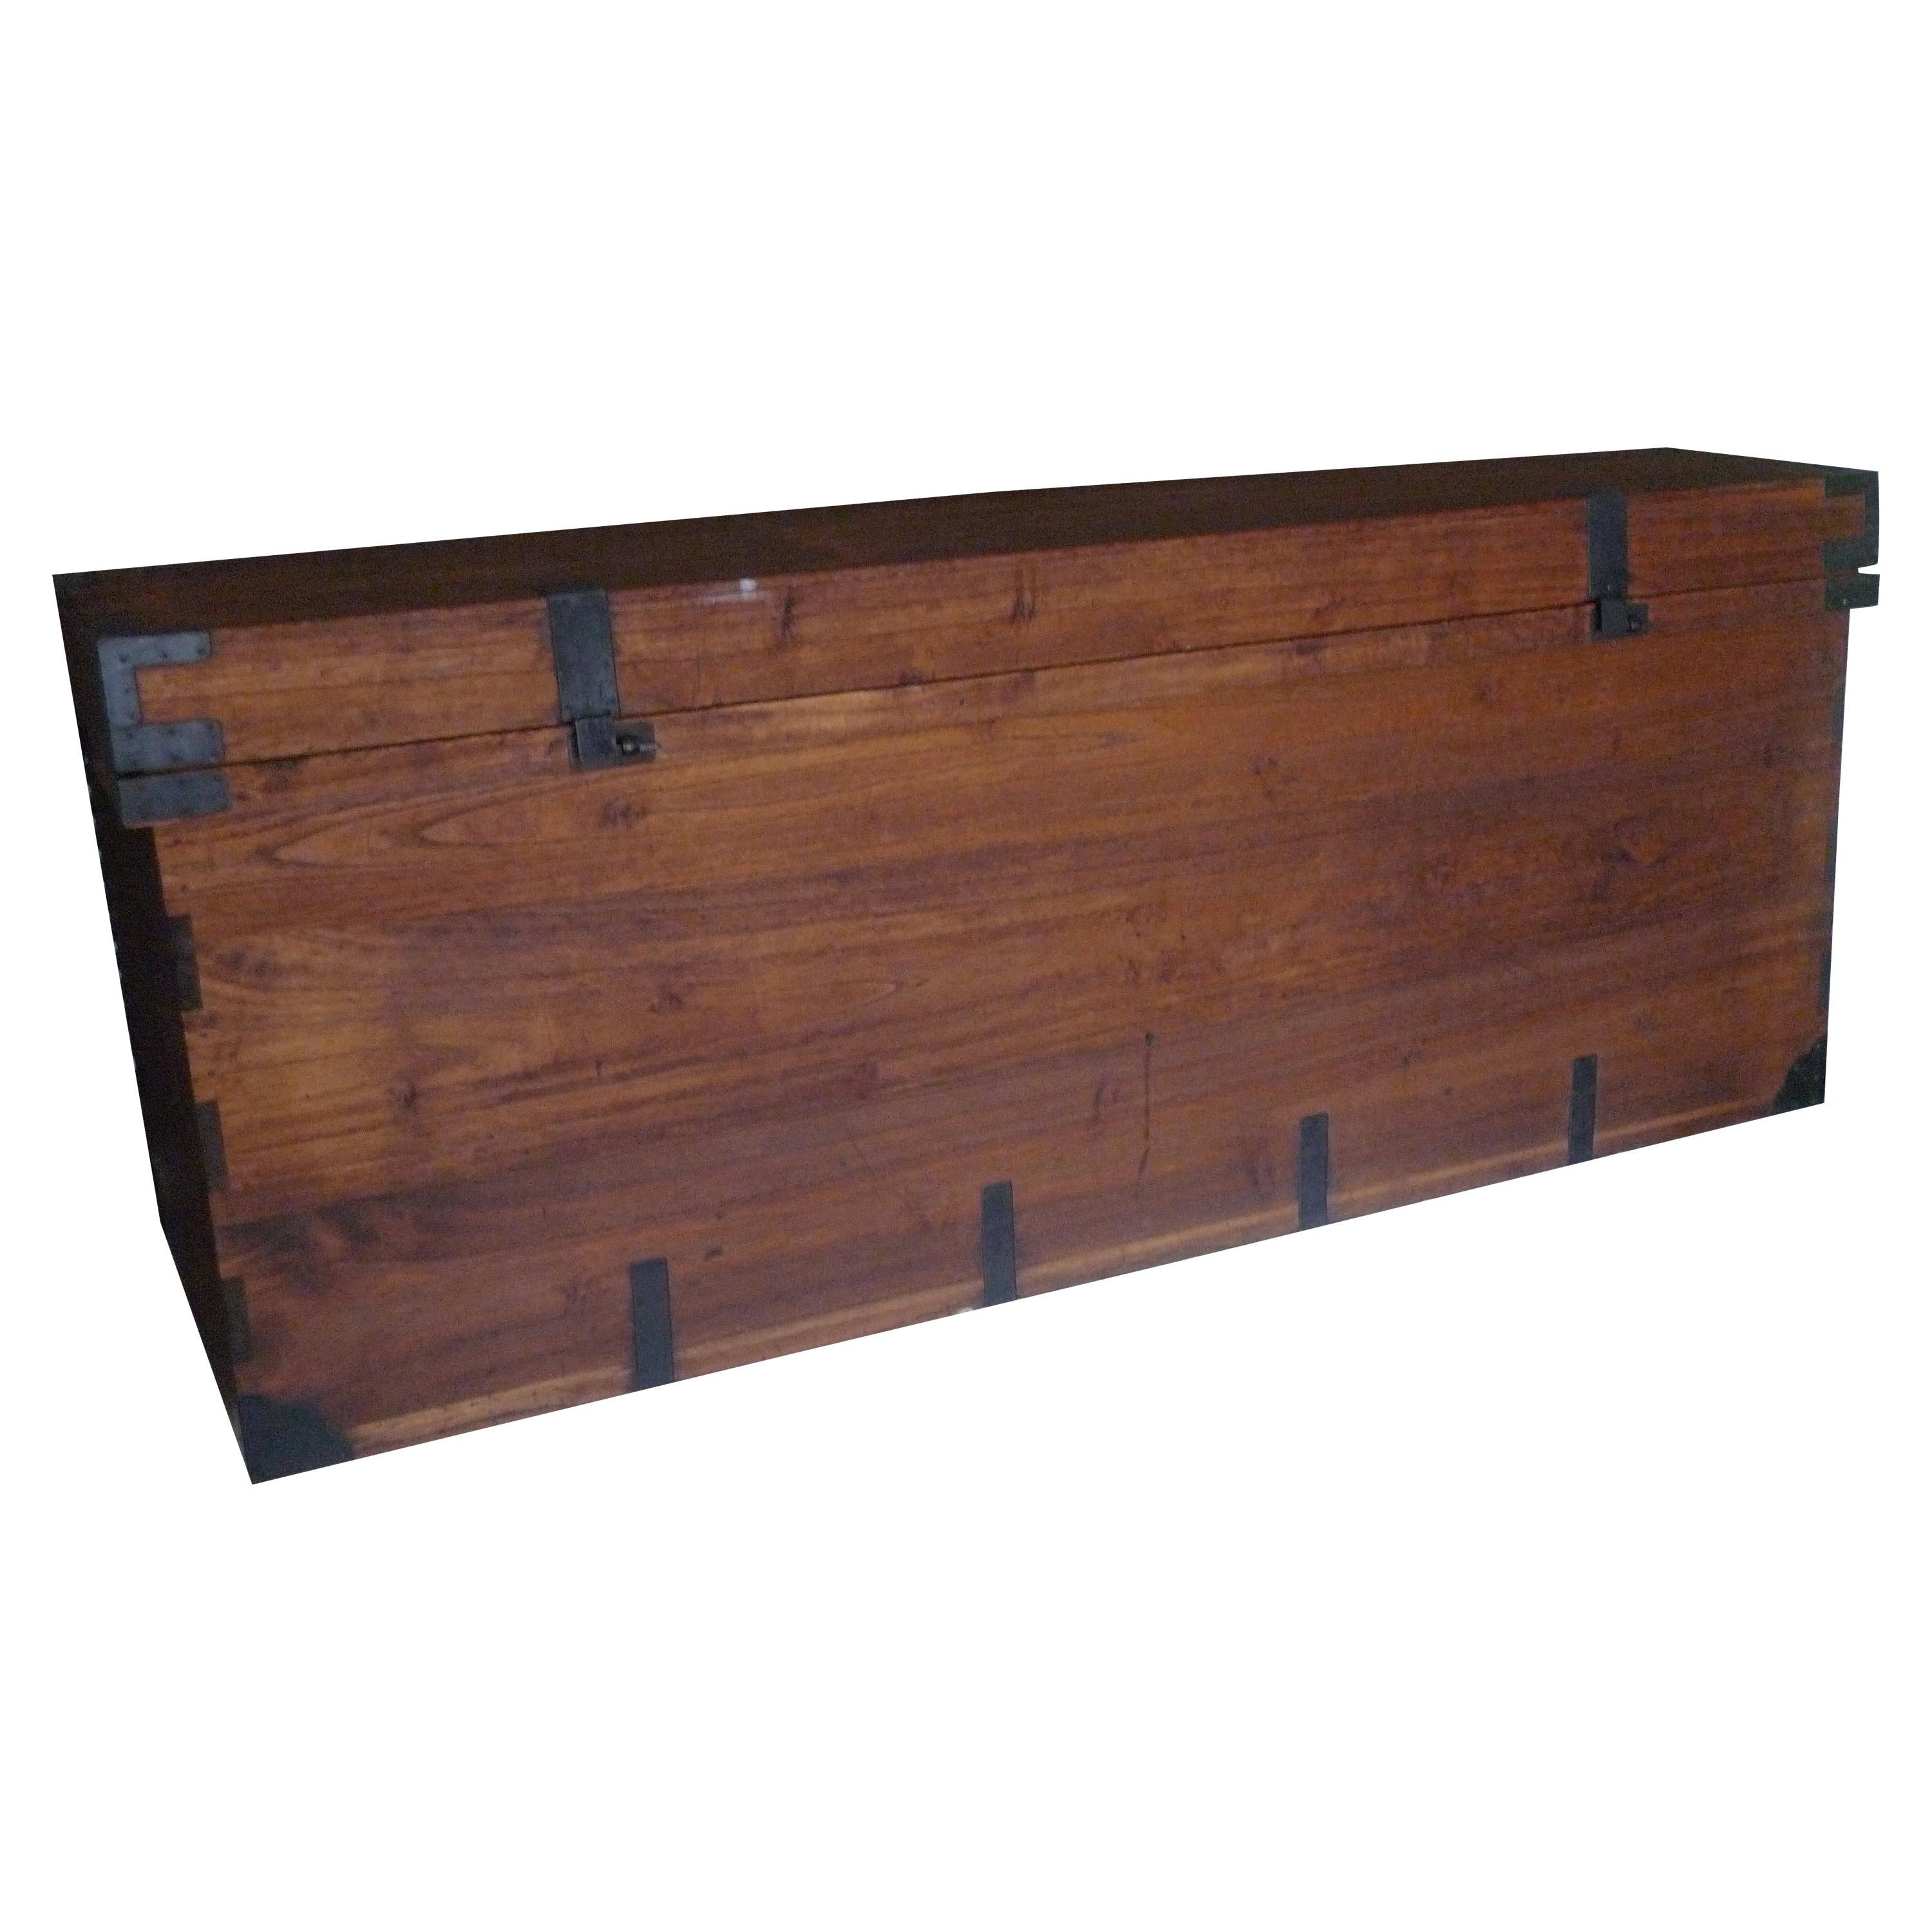 Japanese Nagamochi Chest of Bamboo with Wrought Iron Hardware, circa 1800s For Sale